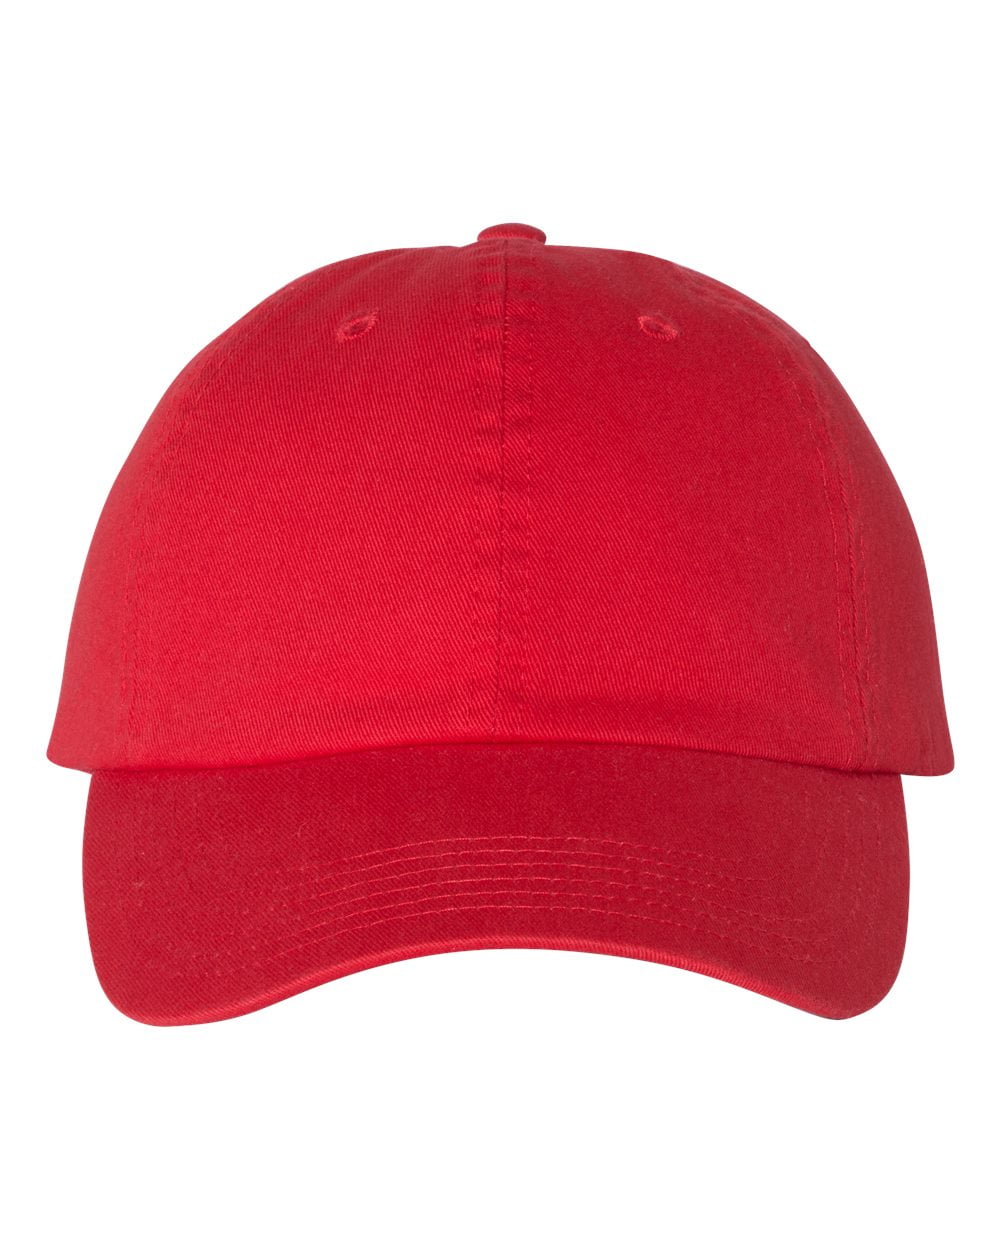 Red Blue Textures Classic Baseball Cap Men Women Dad Hat Twill Adjustable Size